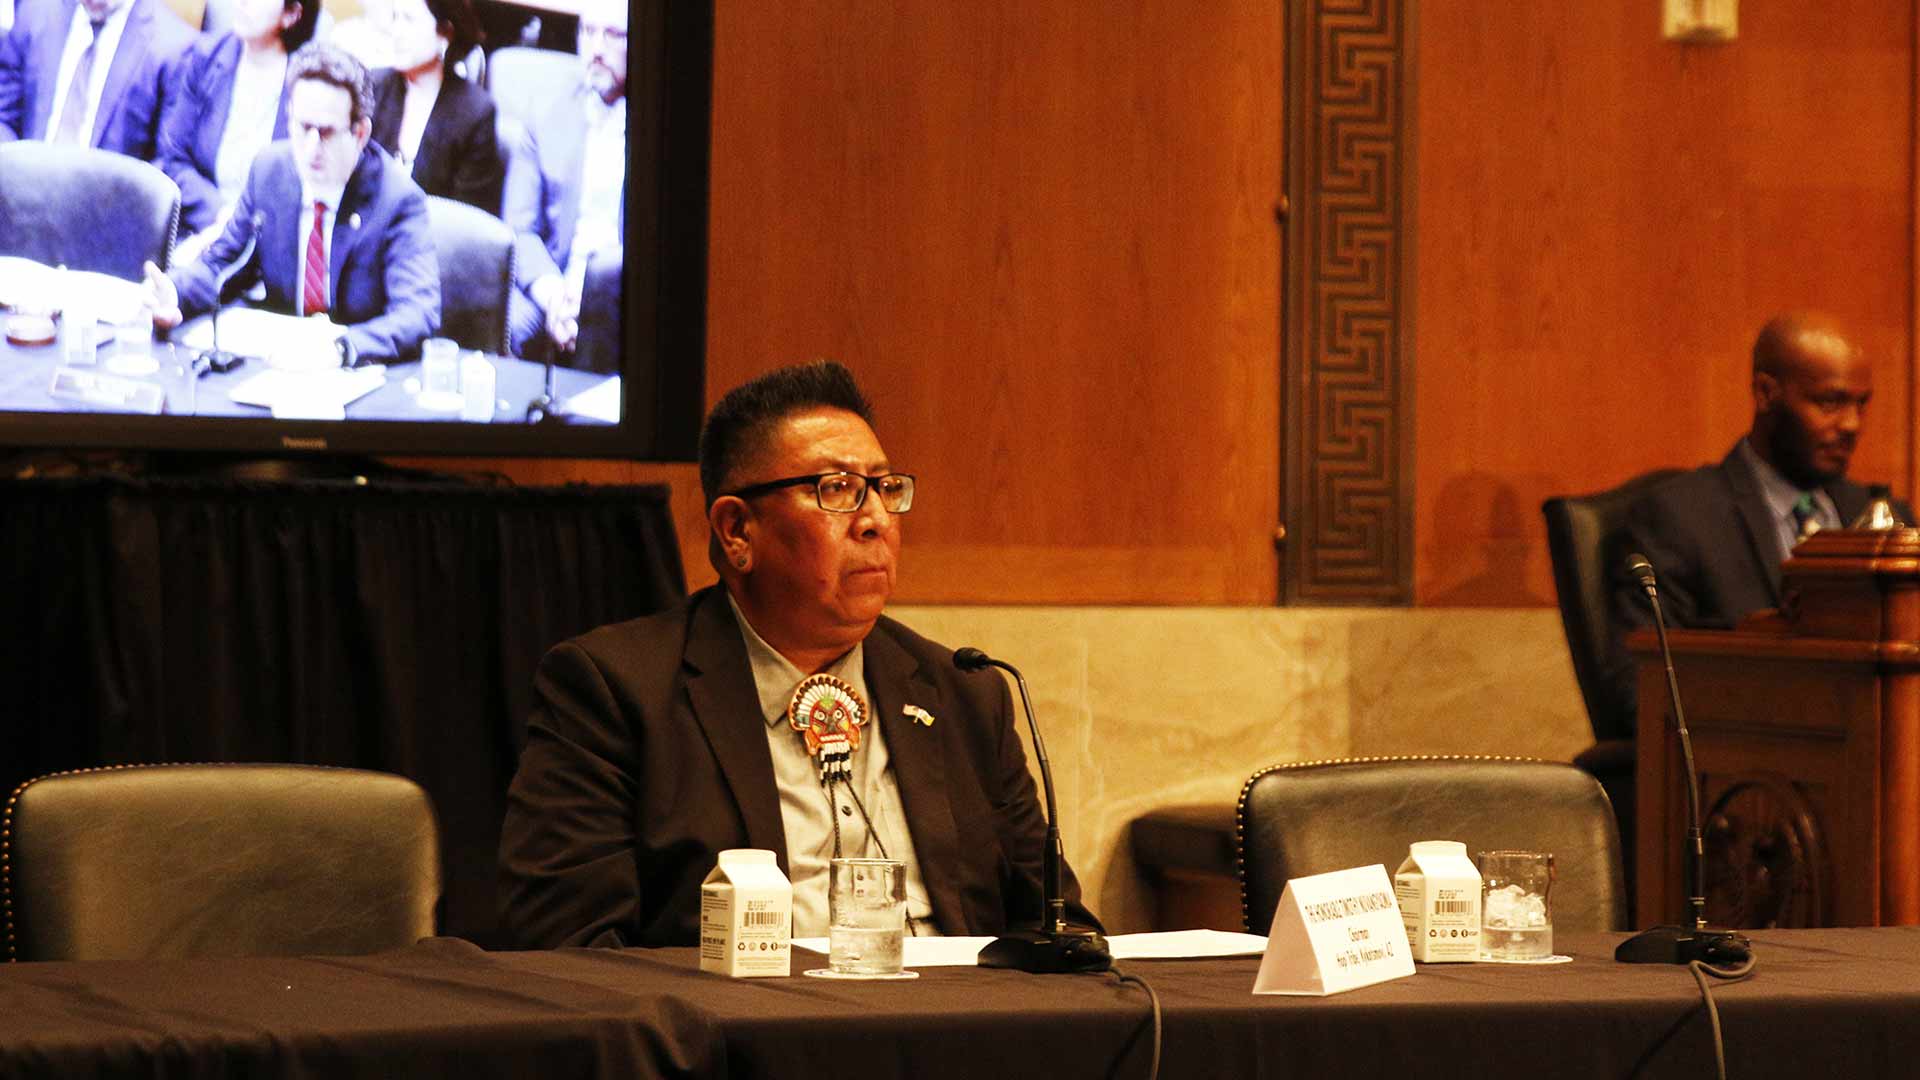 Hopi leader tells panel that red tape, financial hurdles put aid out of reach